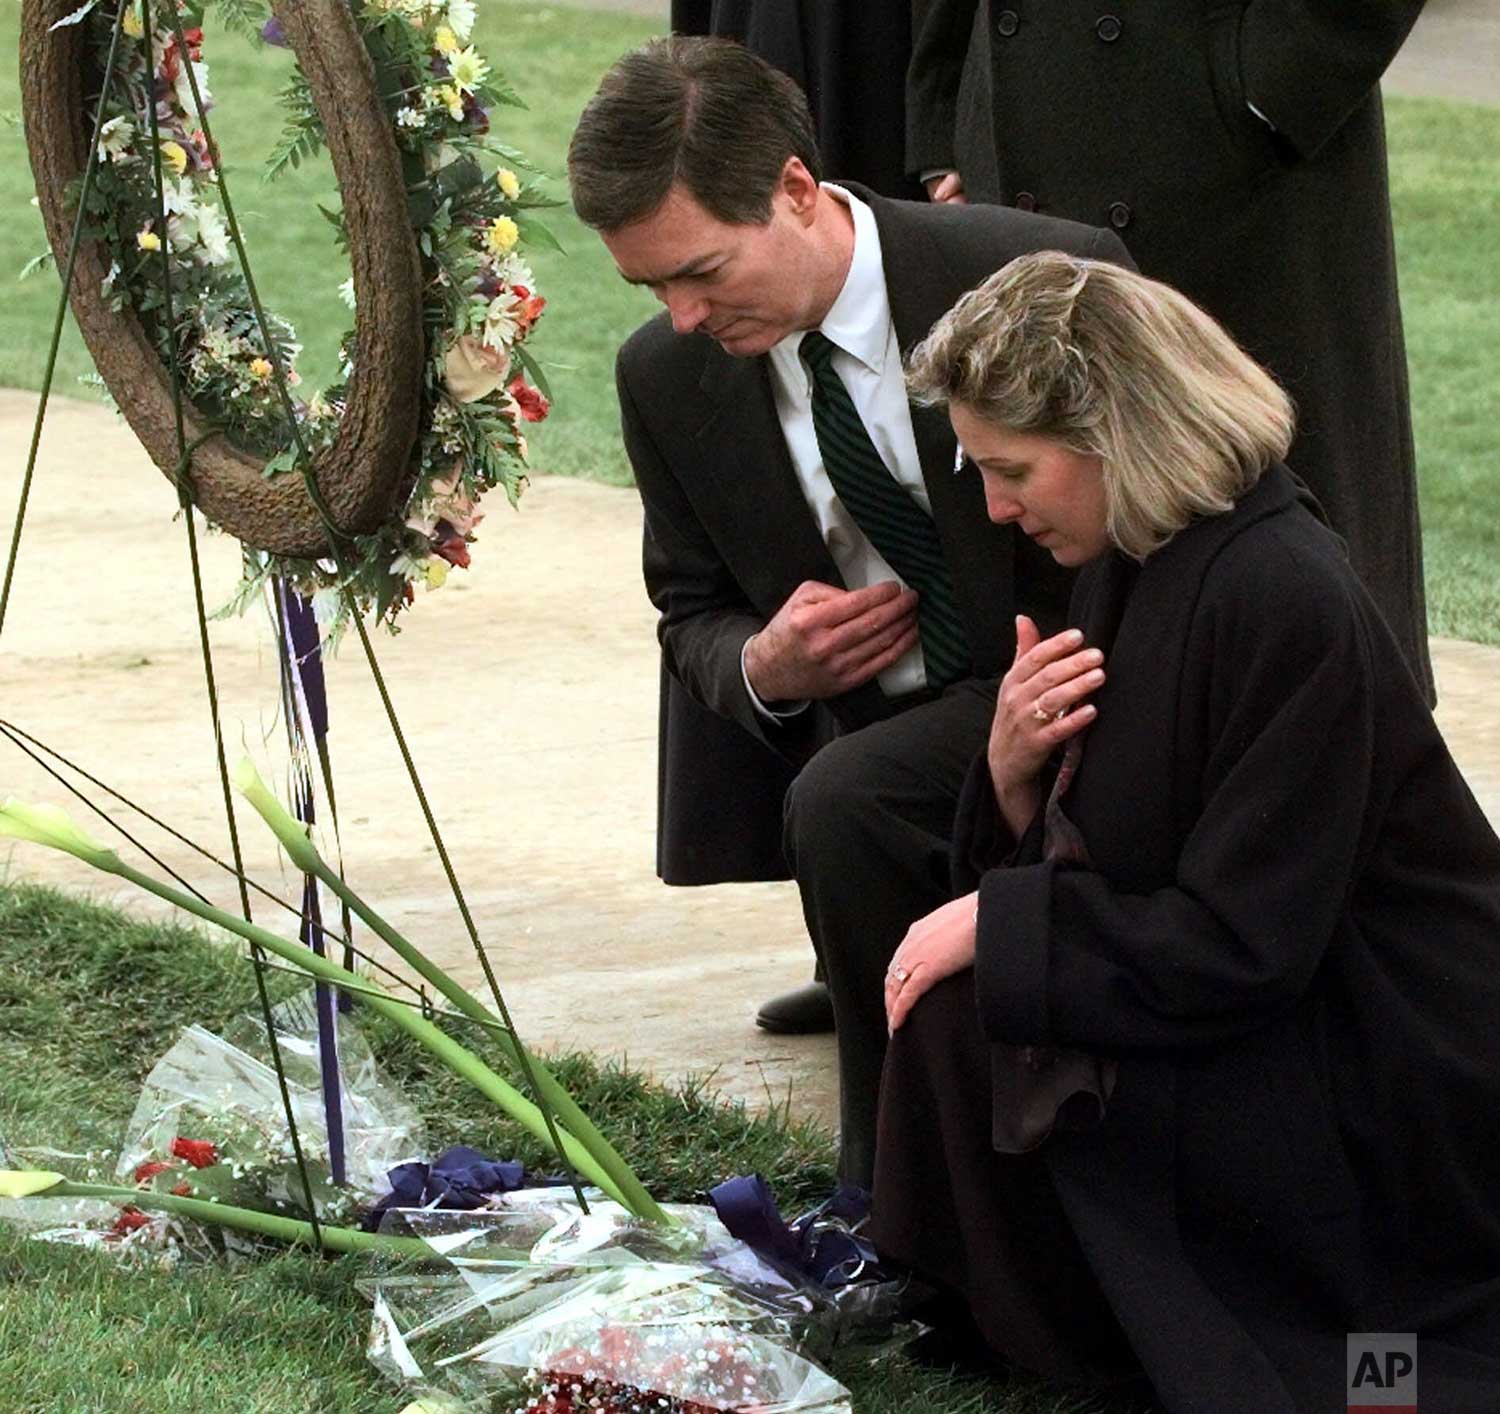  Colorado Governor Bill Owens and his wife Frances pay their respects at a memorial wreath after a community wide service in Littleton, Colo., Sunday, April 25, 1999 for the victims of the shooting spree at Columbine High School. (AP Photo/Laura Rauc